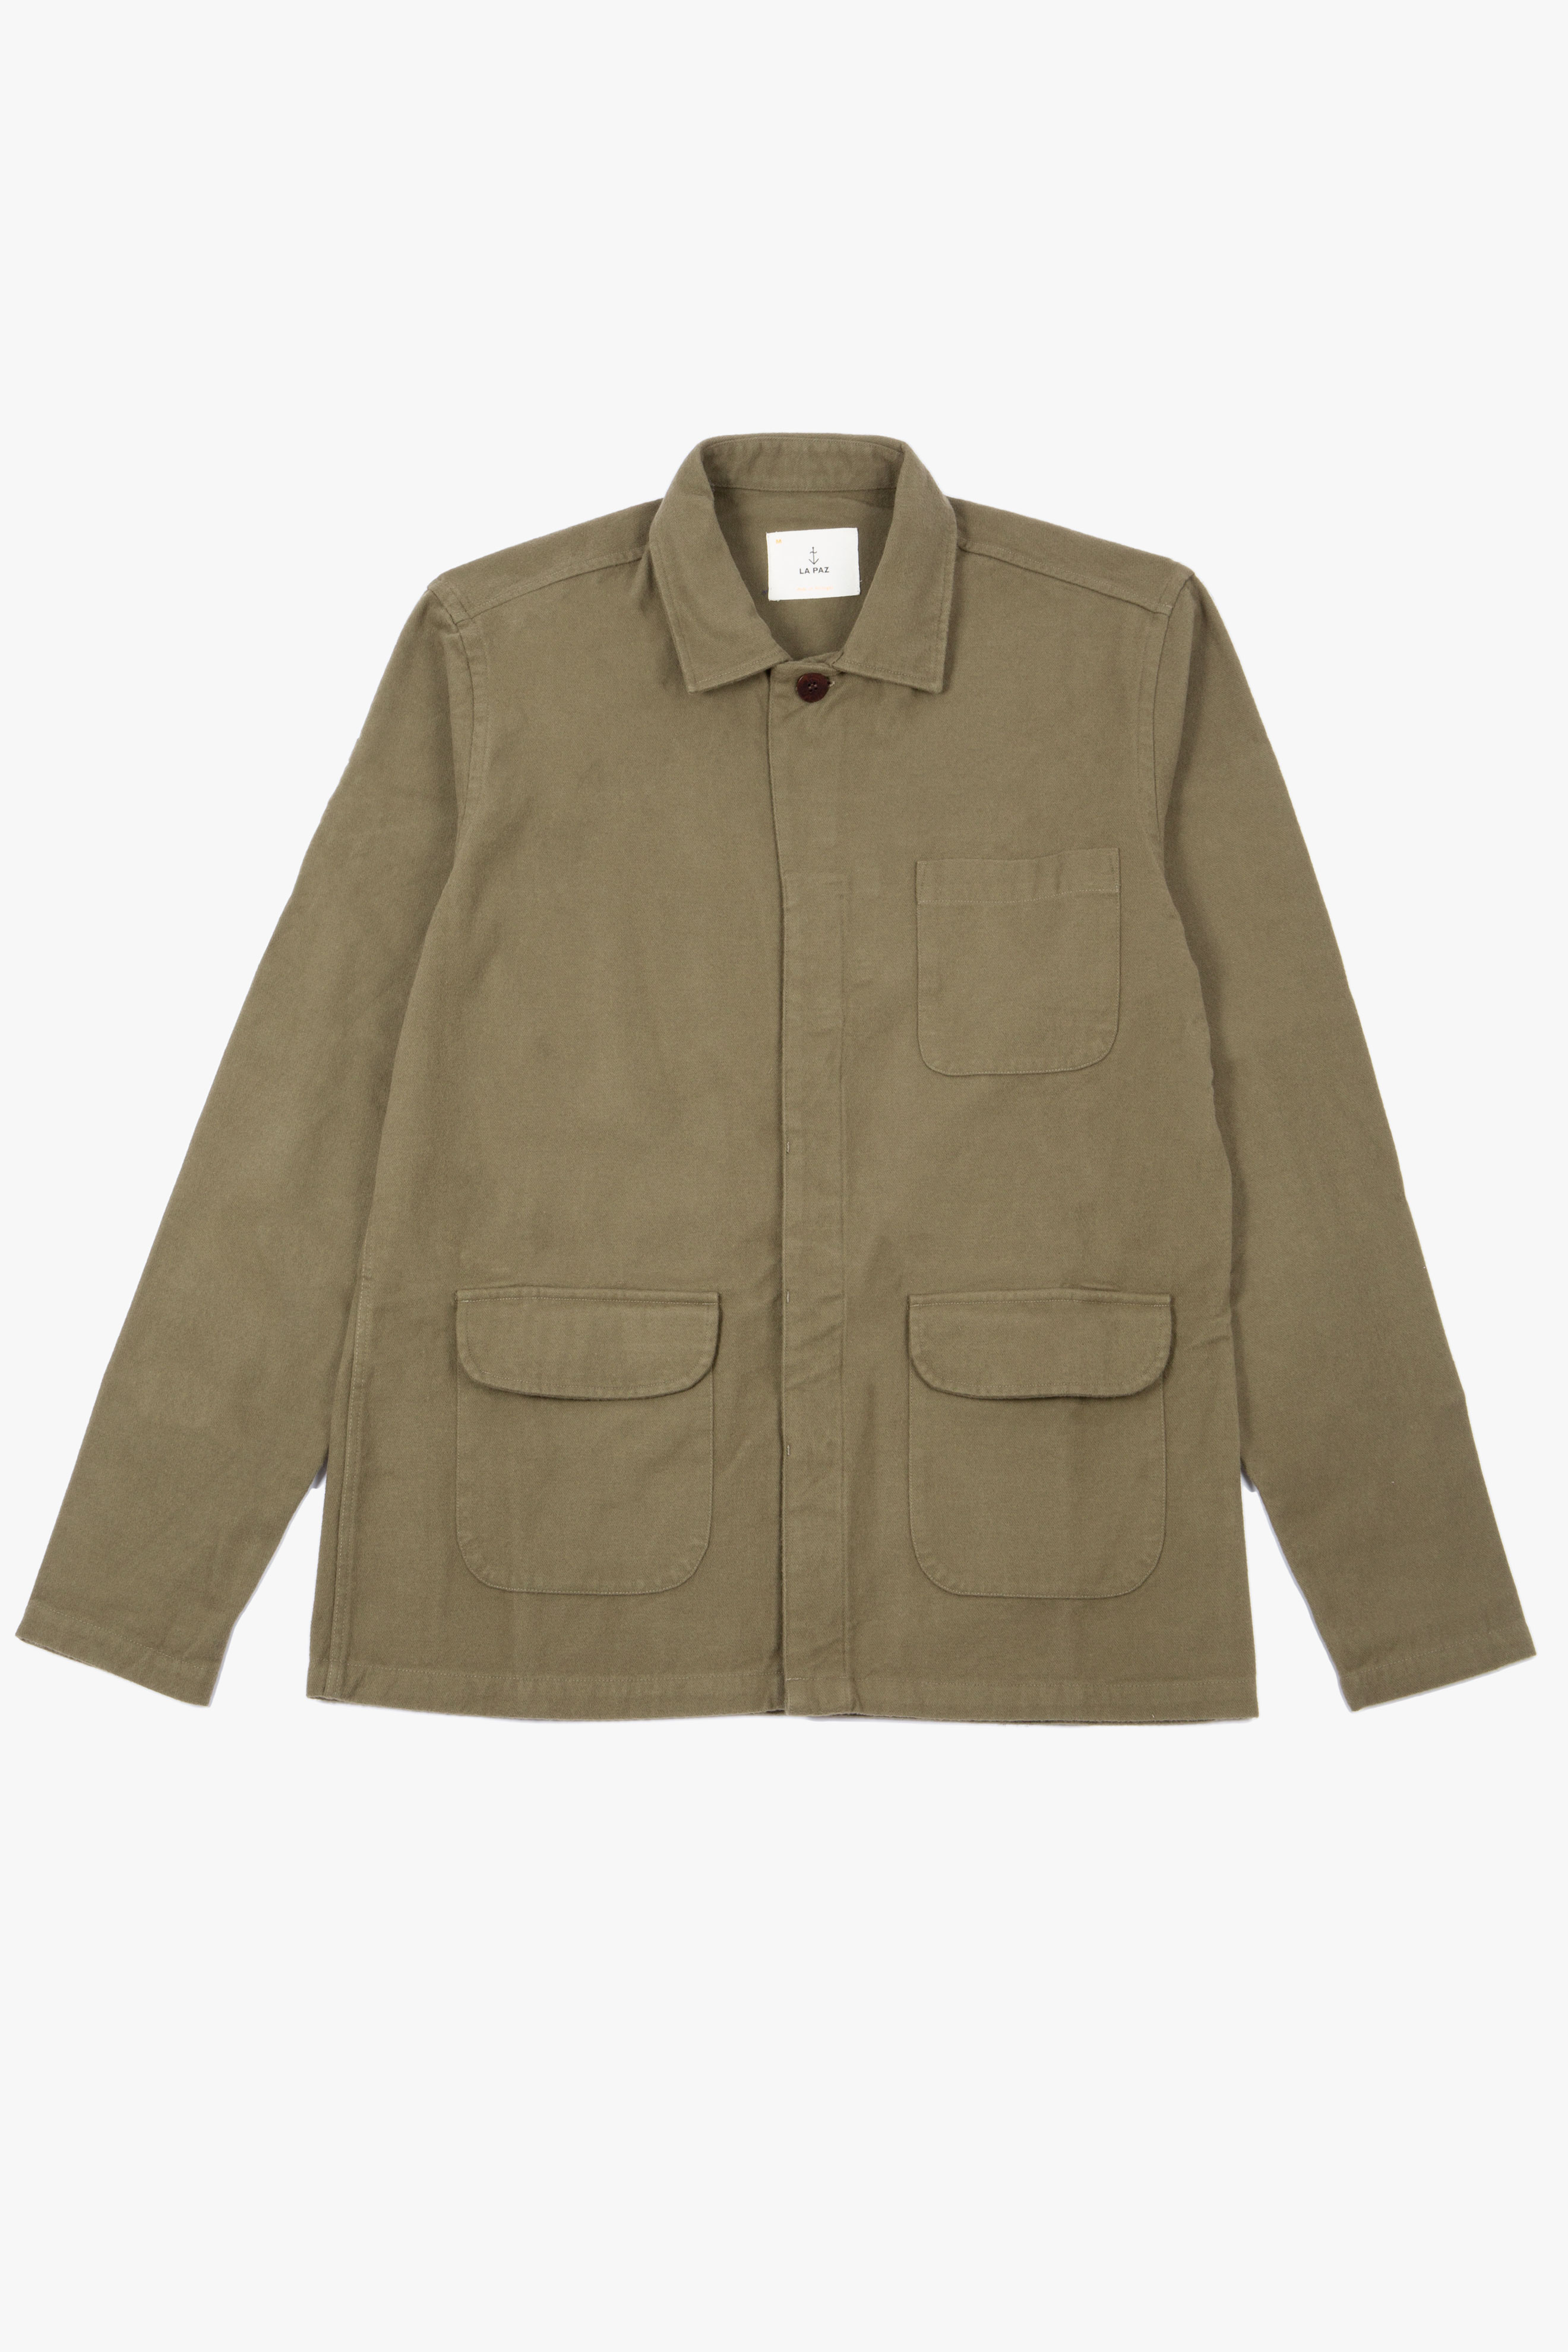 Ramos Over Shirt Olive Green